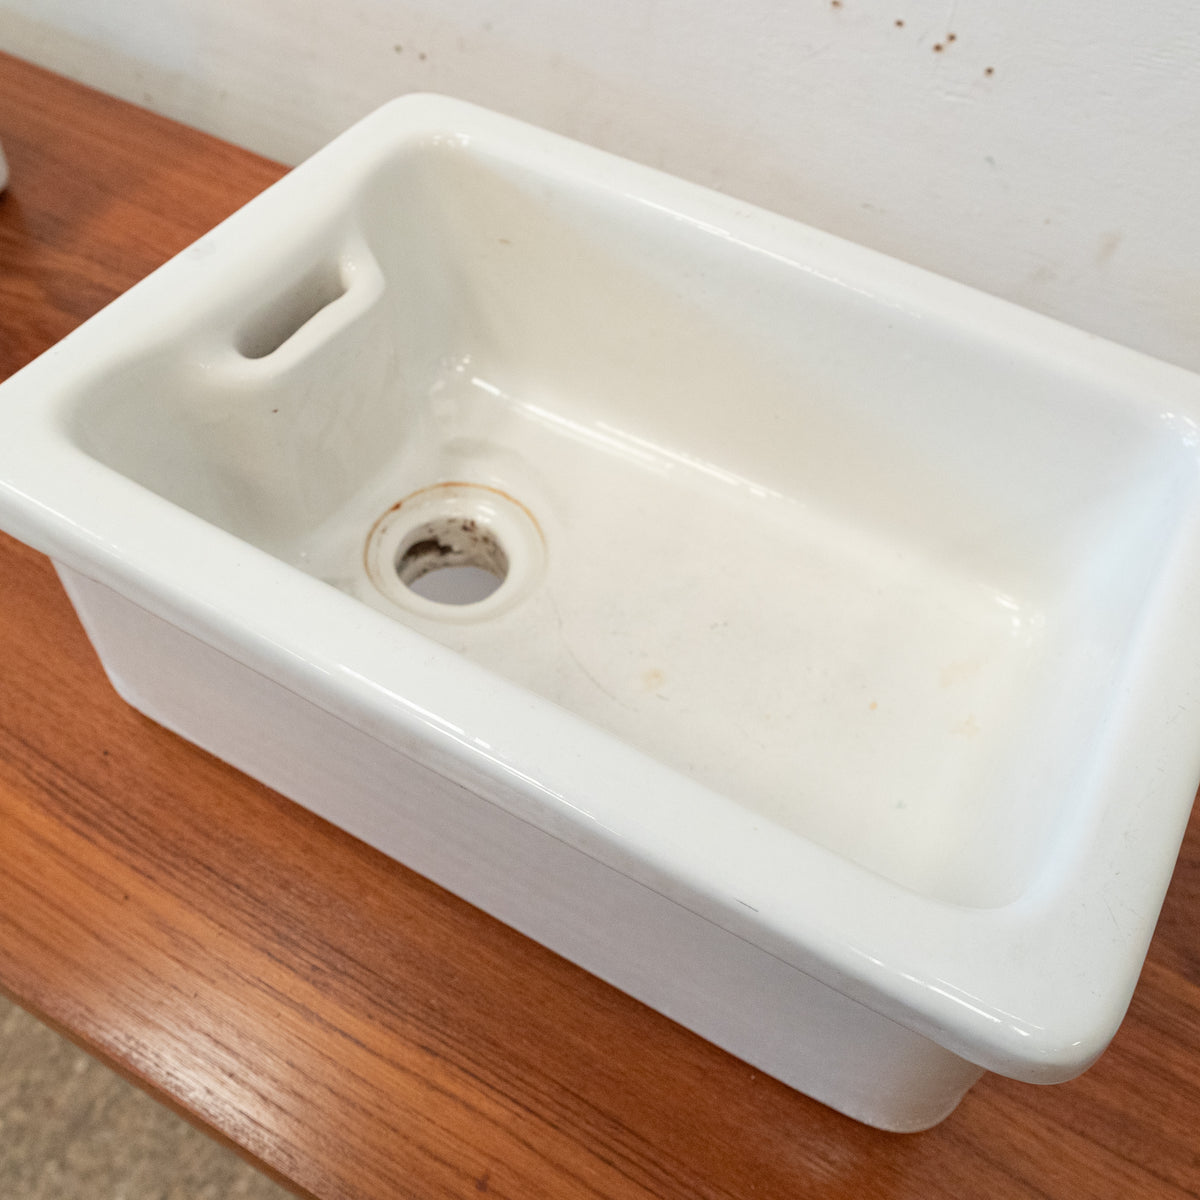 Twin Countertop Butler Sinks on Reclaimed Cast Iron and Teak Unit | The Architectural Forum